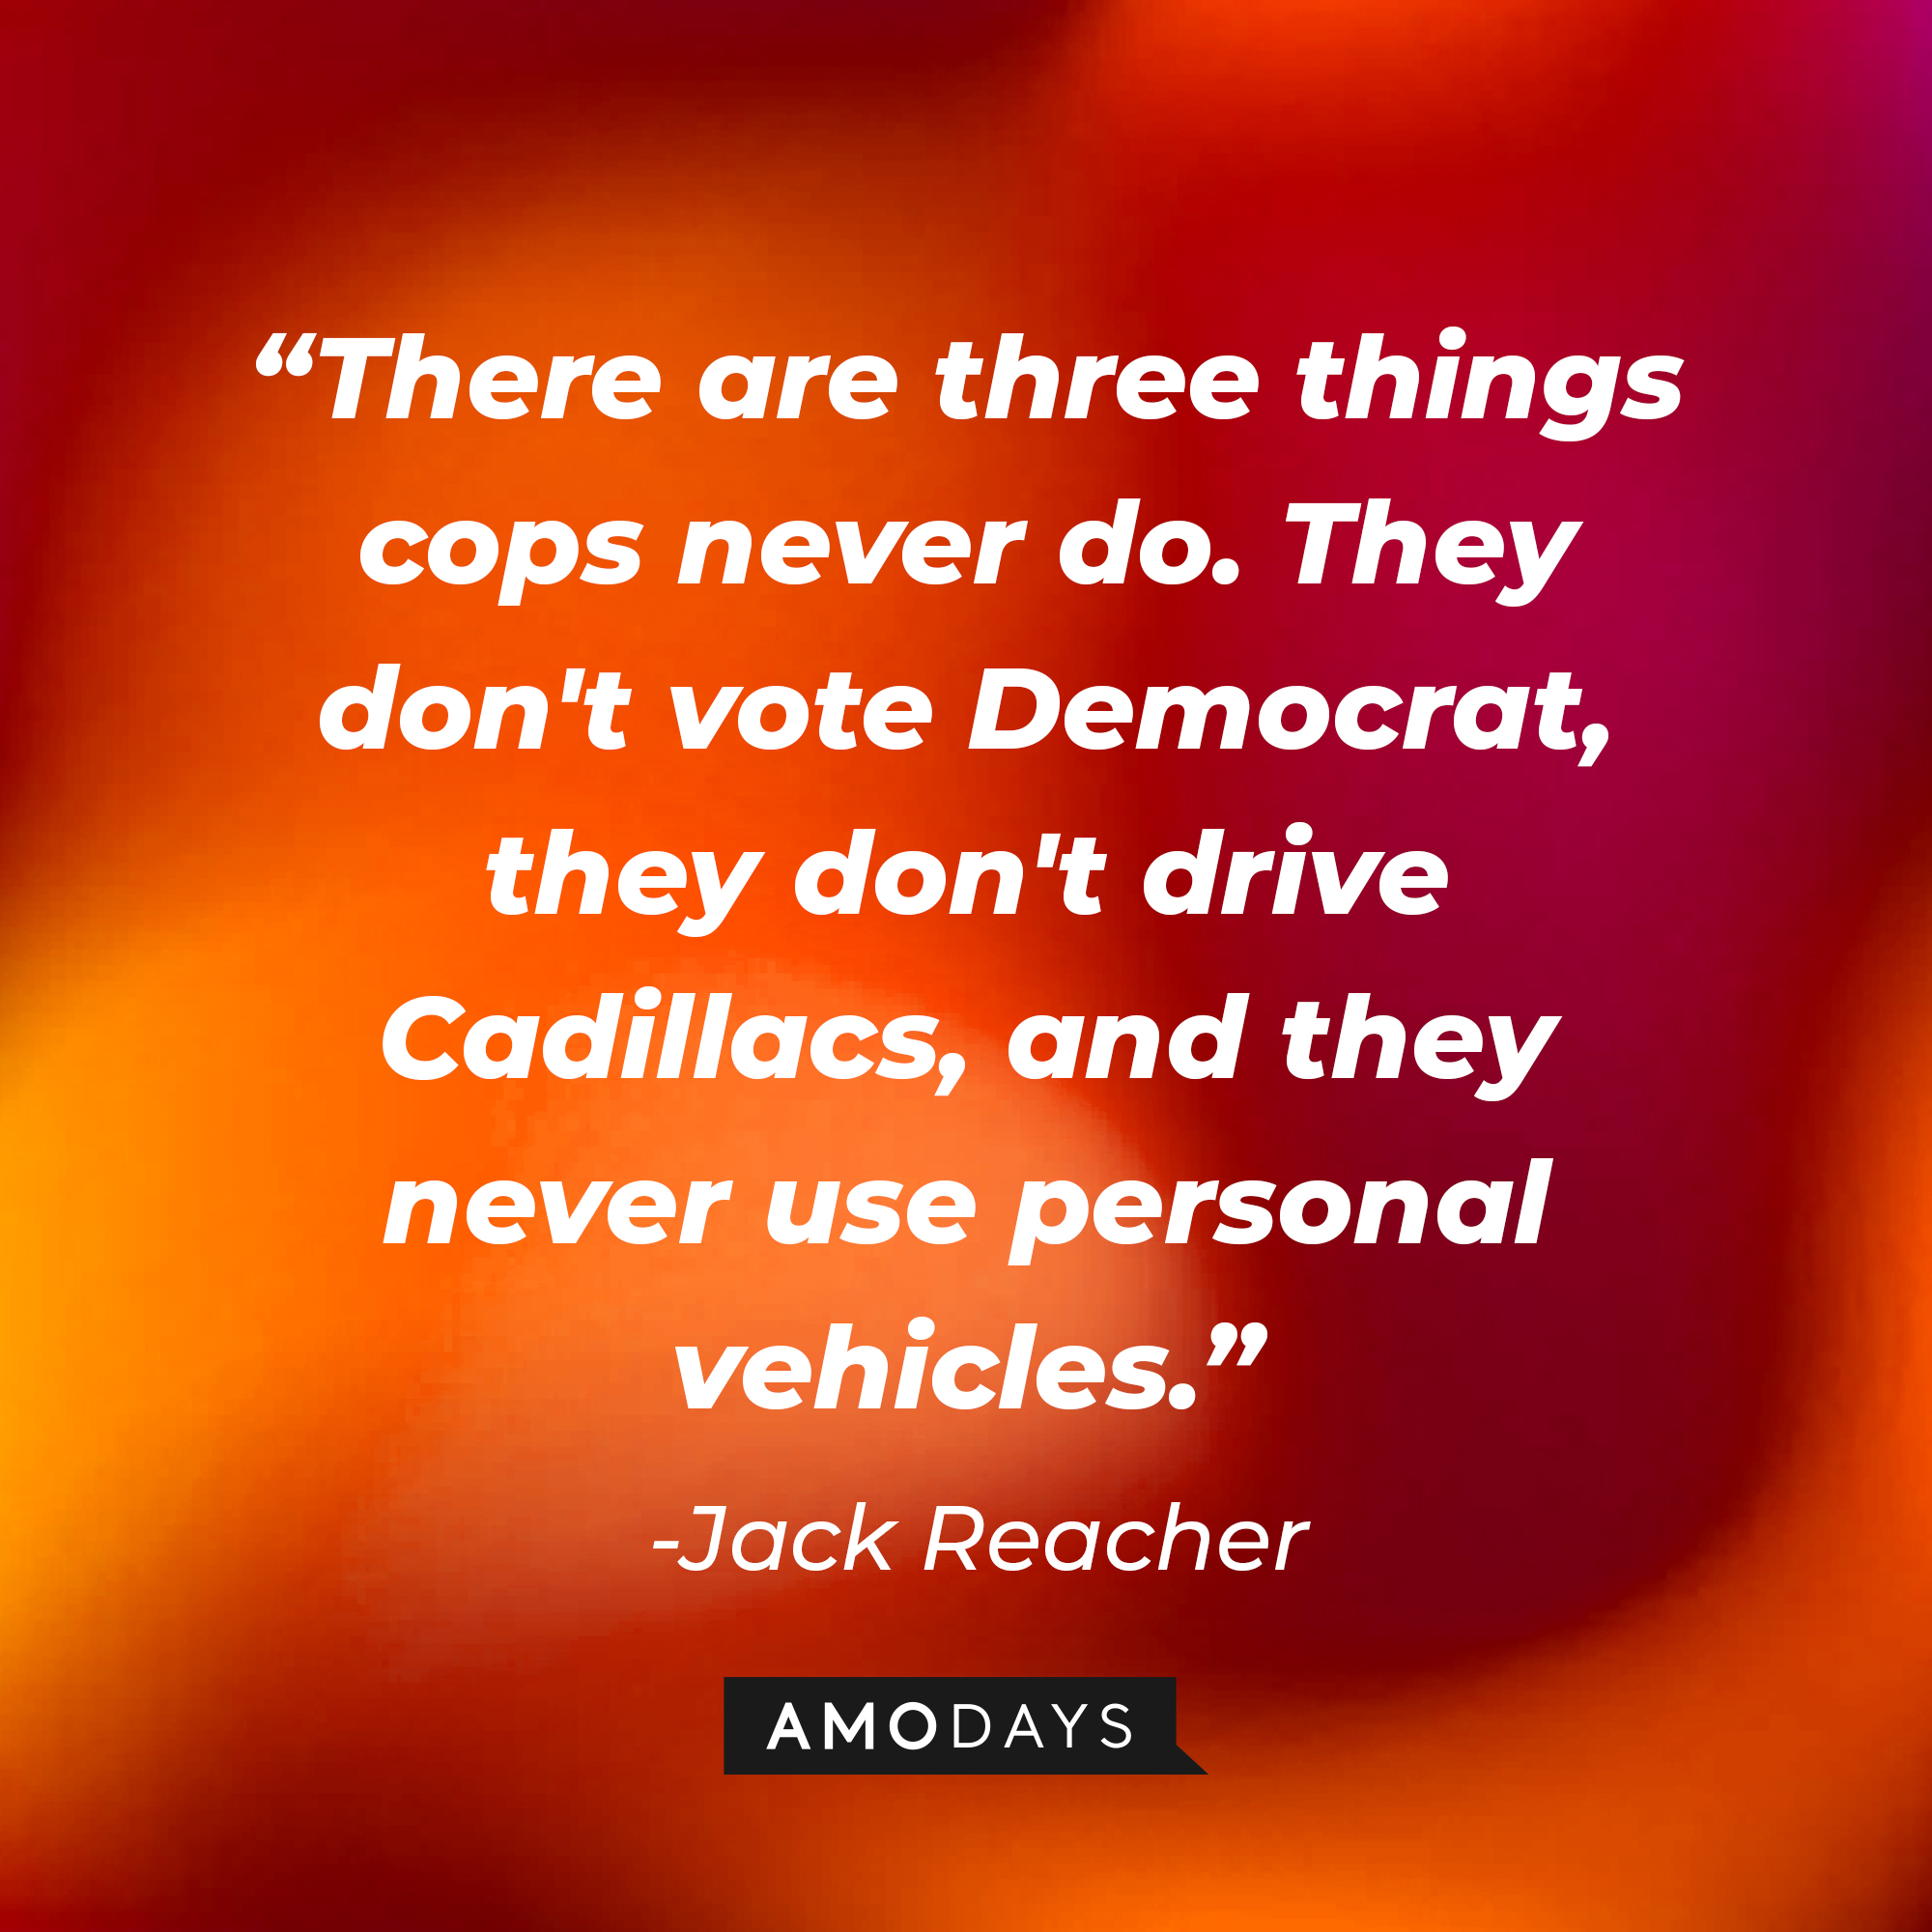 Jack Reacher's quote: "There are three things cops never do. They don't vote Democrat, they don't drive Cadillacs, and they never use personal vehicles" | Source: Amodays